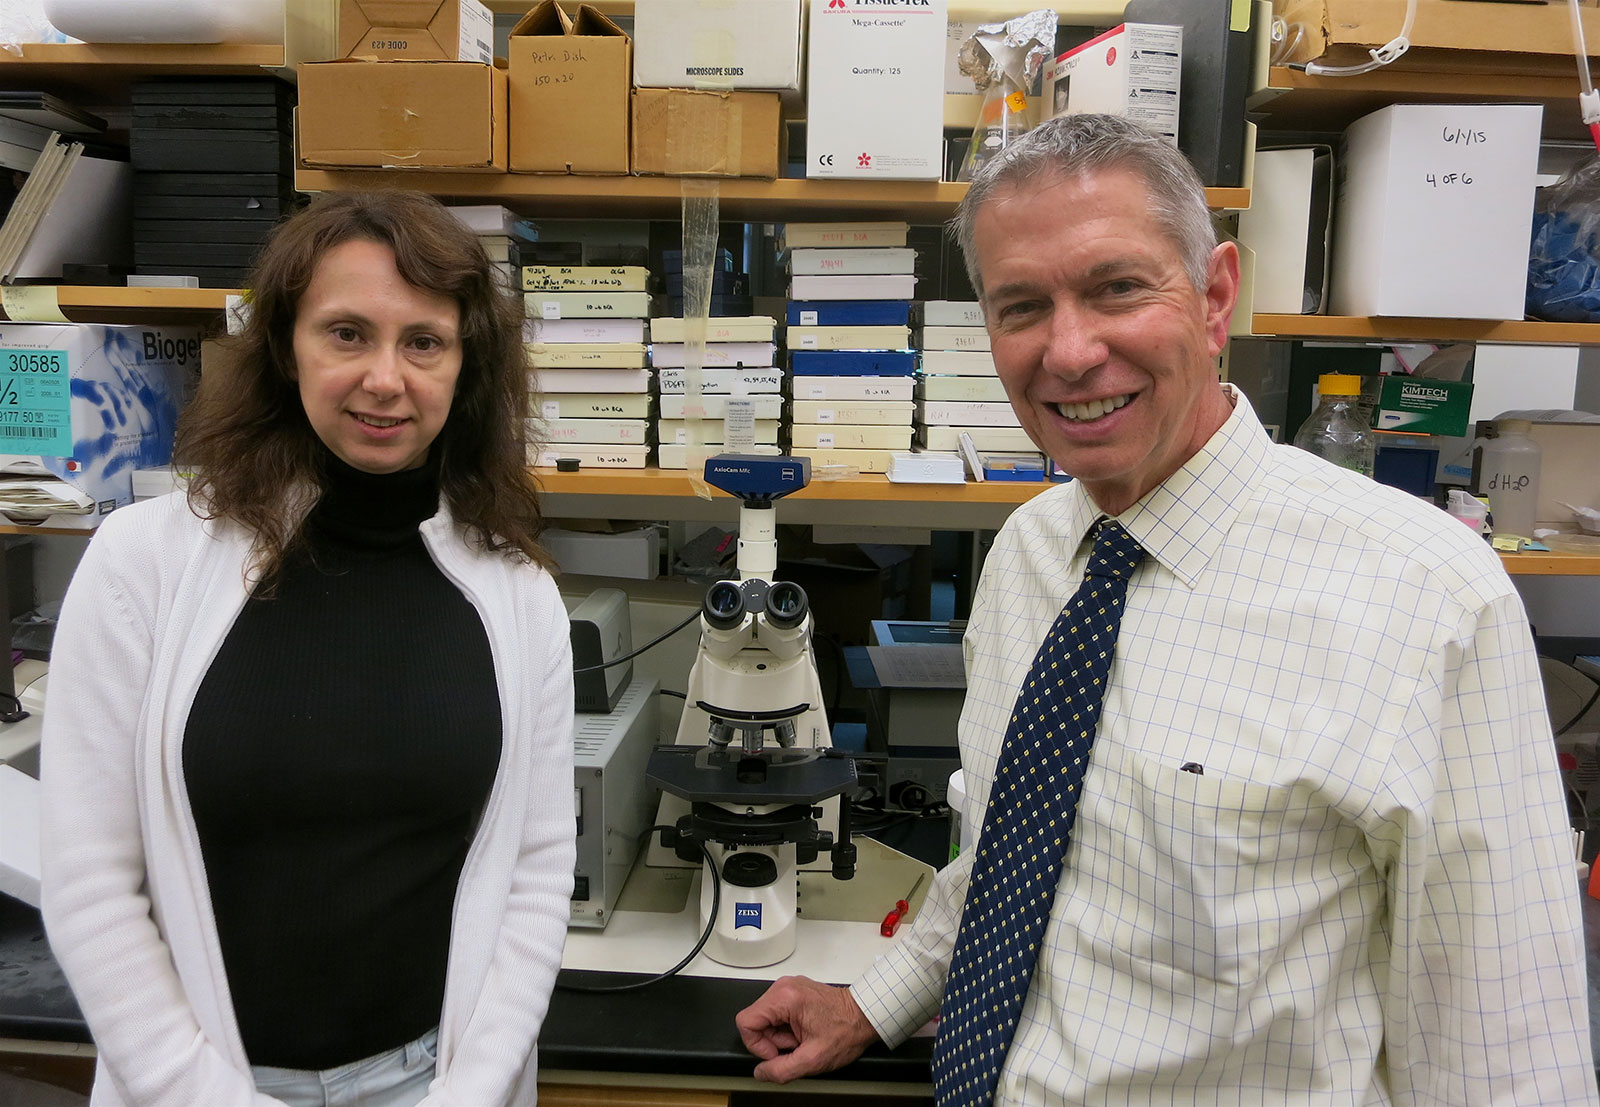 UVA researchers Olga A. Cherepanova and Gary Owens are exploring the role of the Oct4 gene, which was thought to have been inactive after embryonic development, but may play a key role in preventing many diseases of aging.